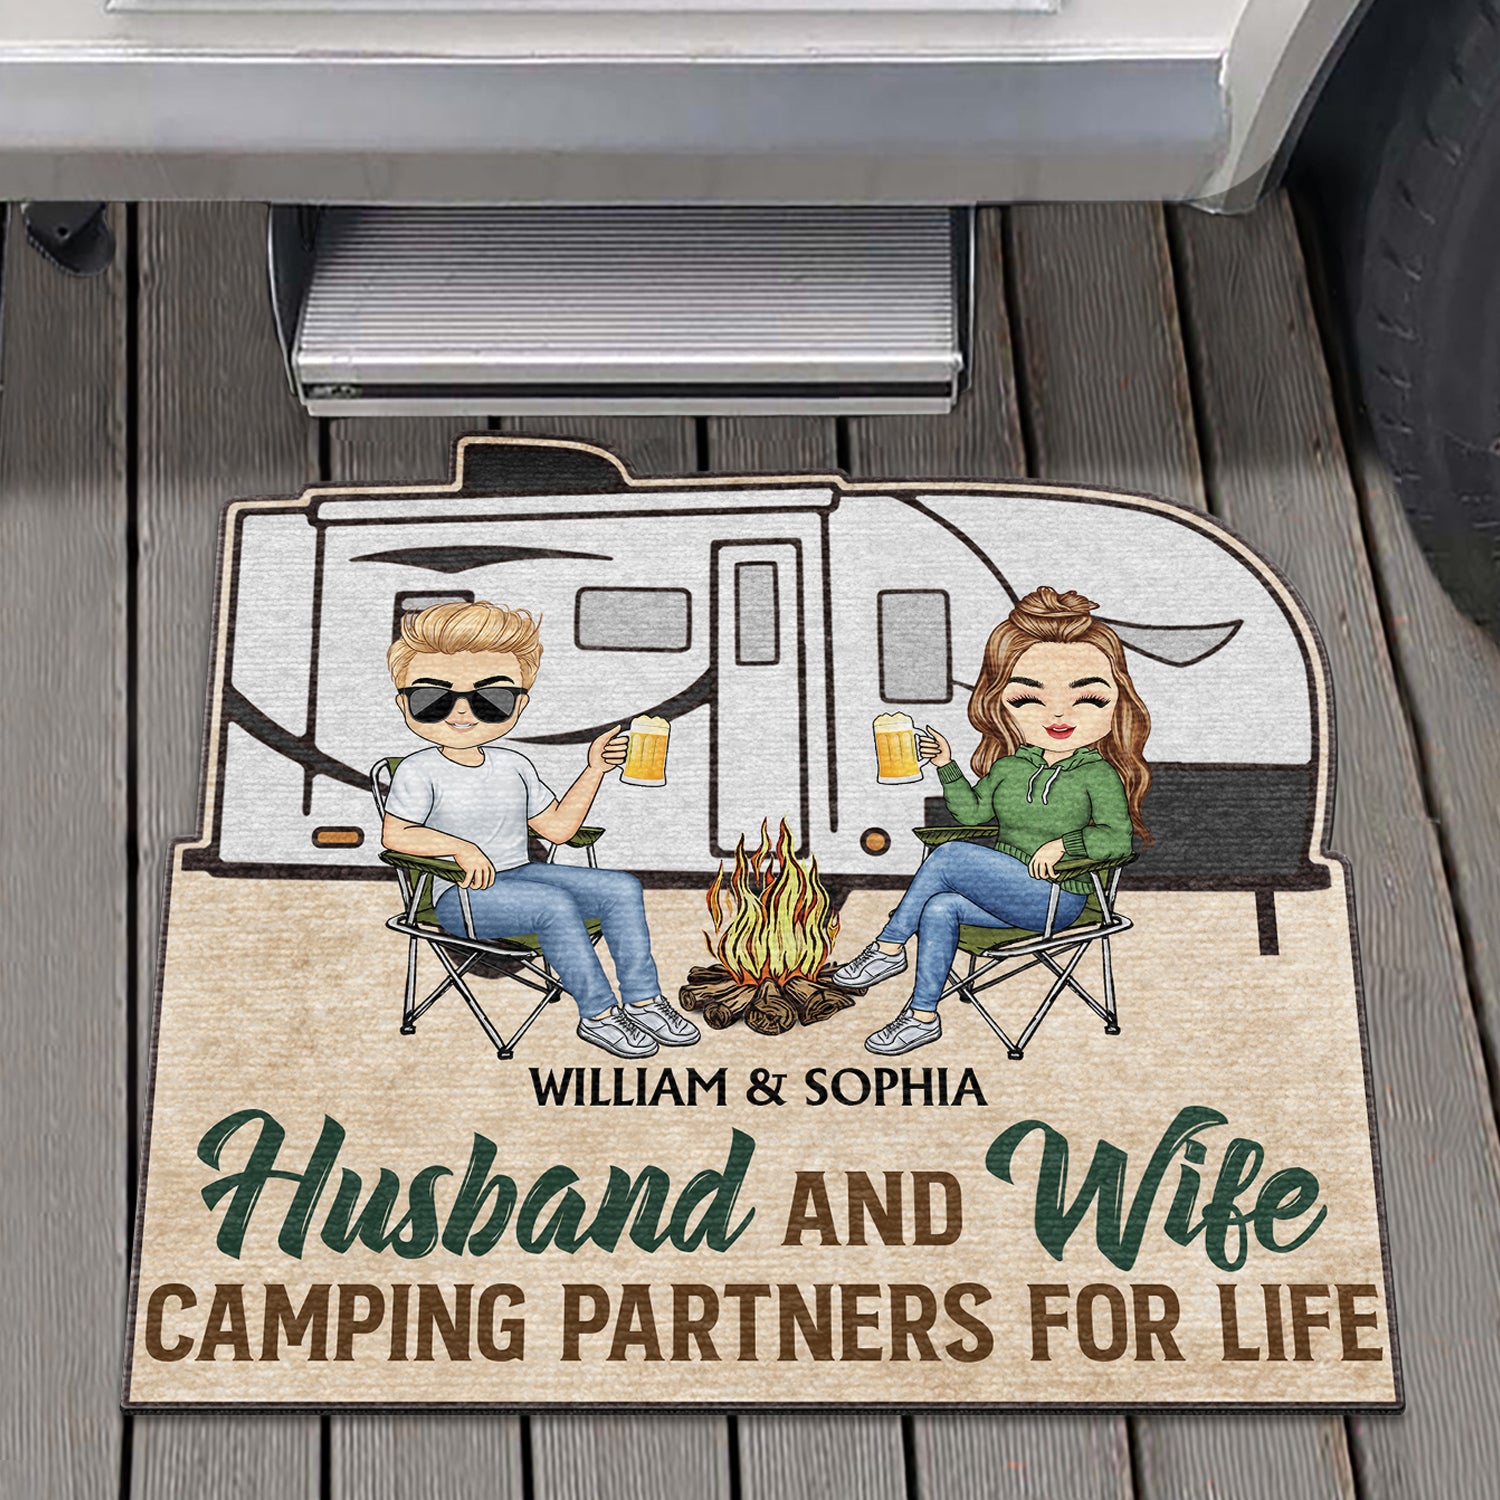 Husband And Wife Camping Partners For Life - Gift For Camping Couples - Personalized Custom Shaped Doormat